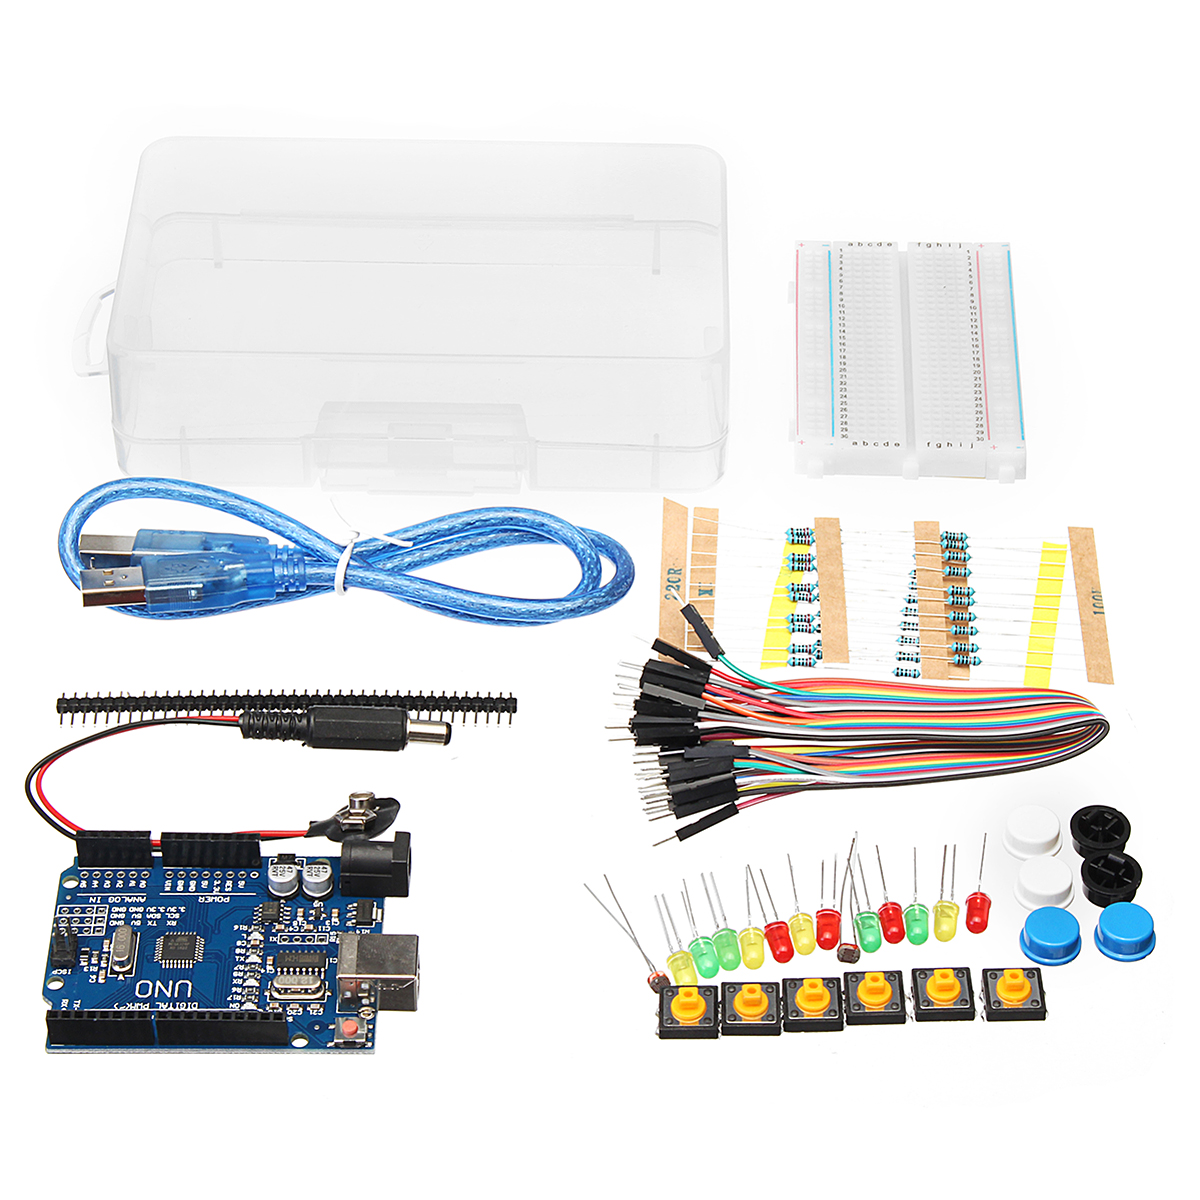 

Basic Starter Kit UNO R3 Mini Breadboard LED Jumper Wire Button For Arduino With Box